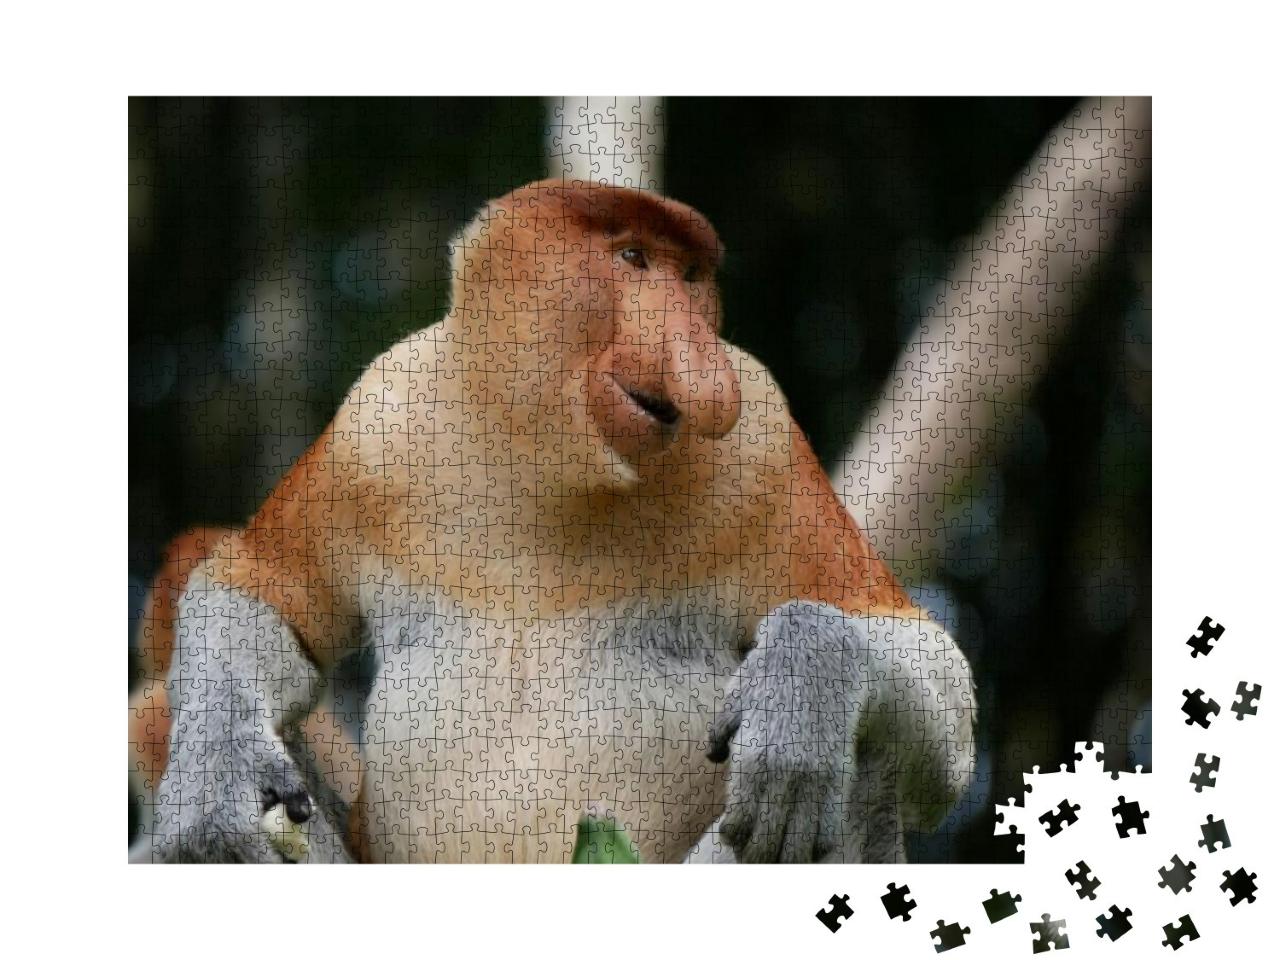 Mature Male Proboscis Monkey or Long-Nosed Monkey Nasalis... Jigsaw Puzzle with 1000 pieces